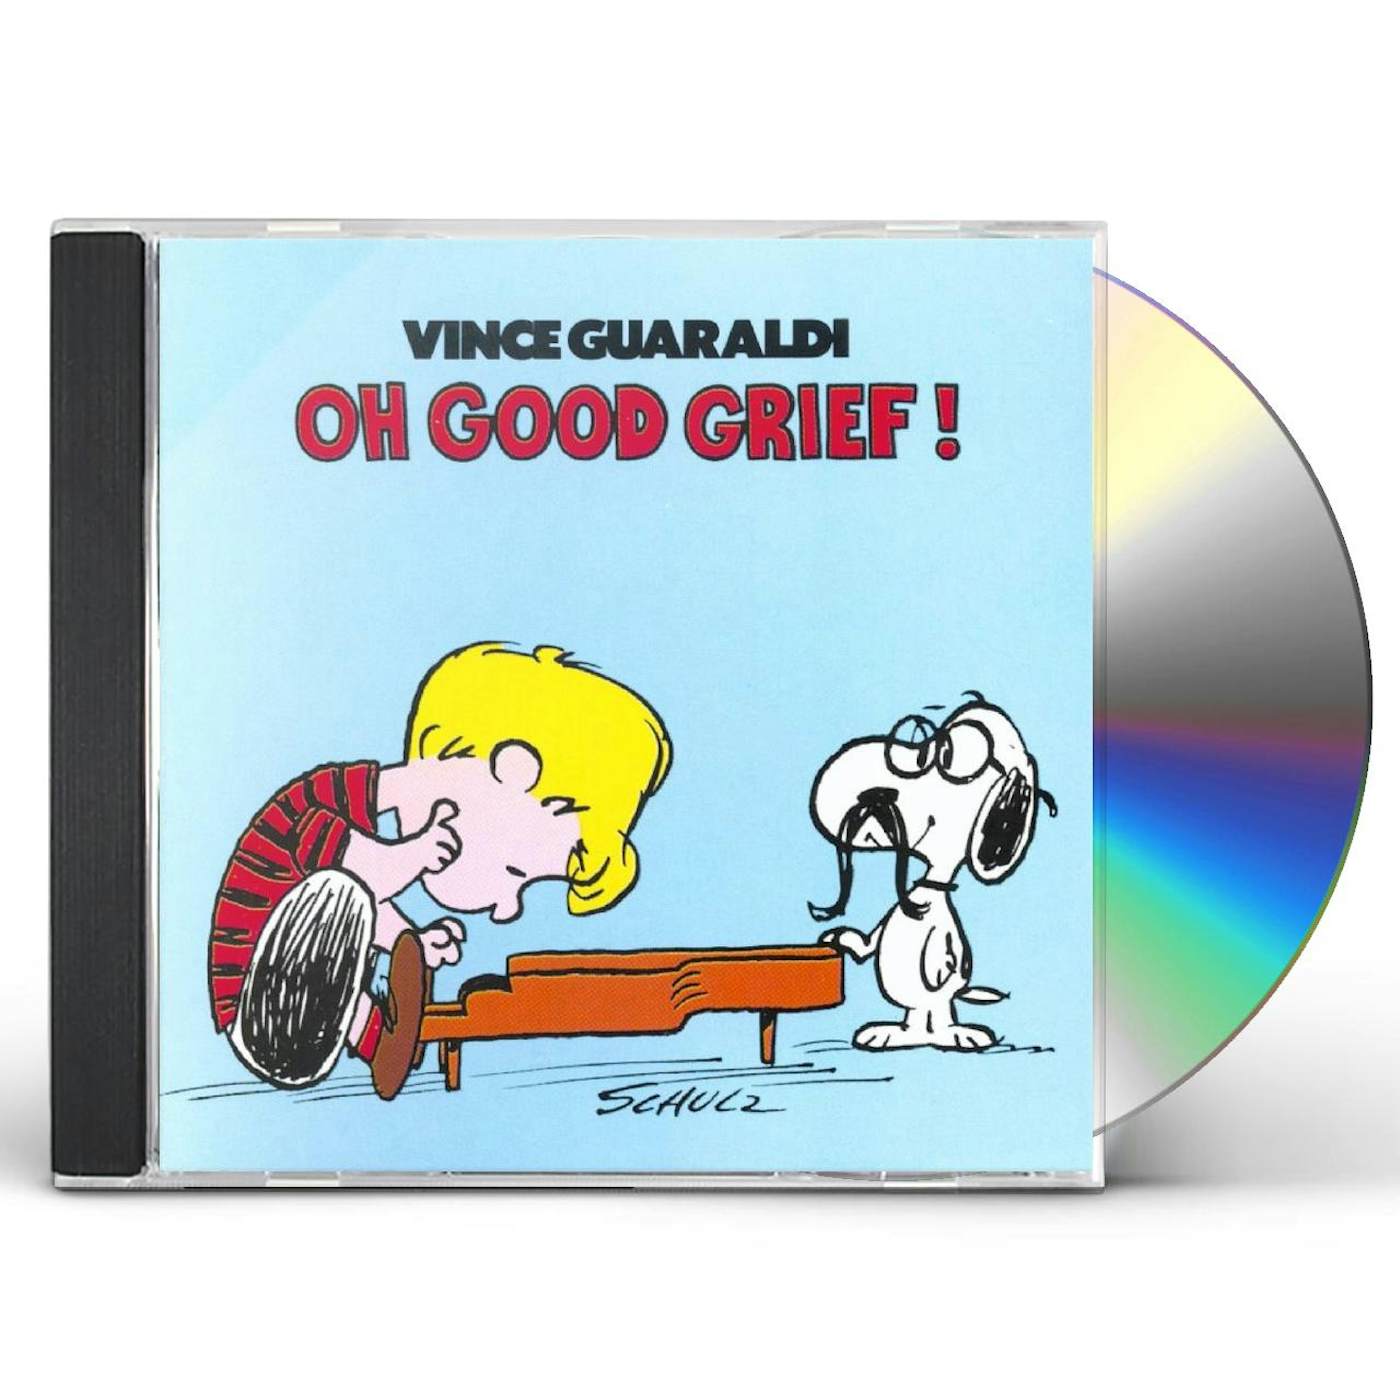 Vince Guaraldi OH GOOD GRIEF CD